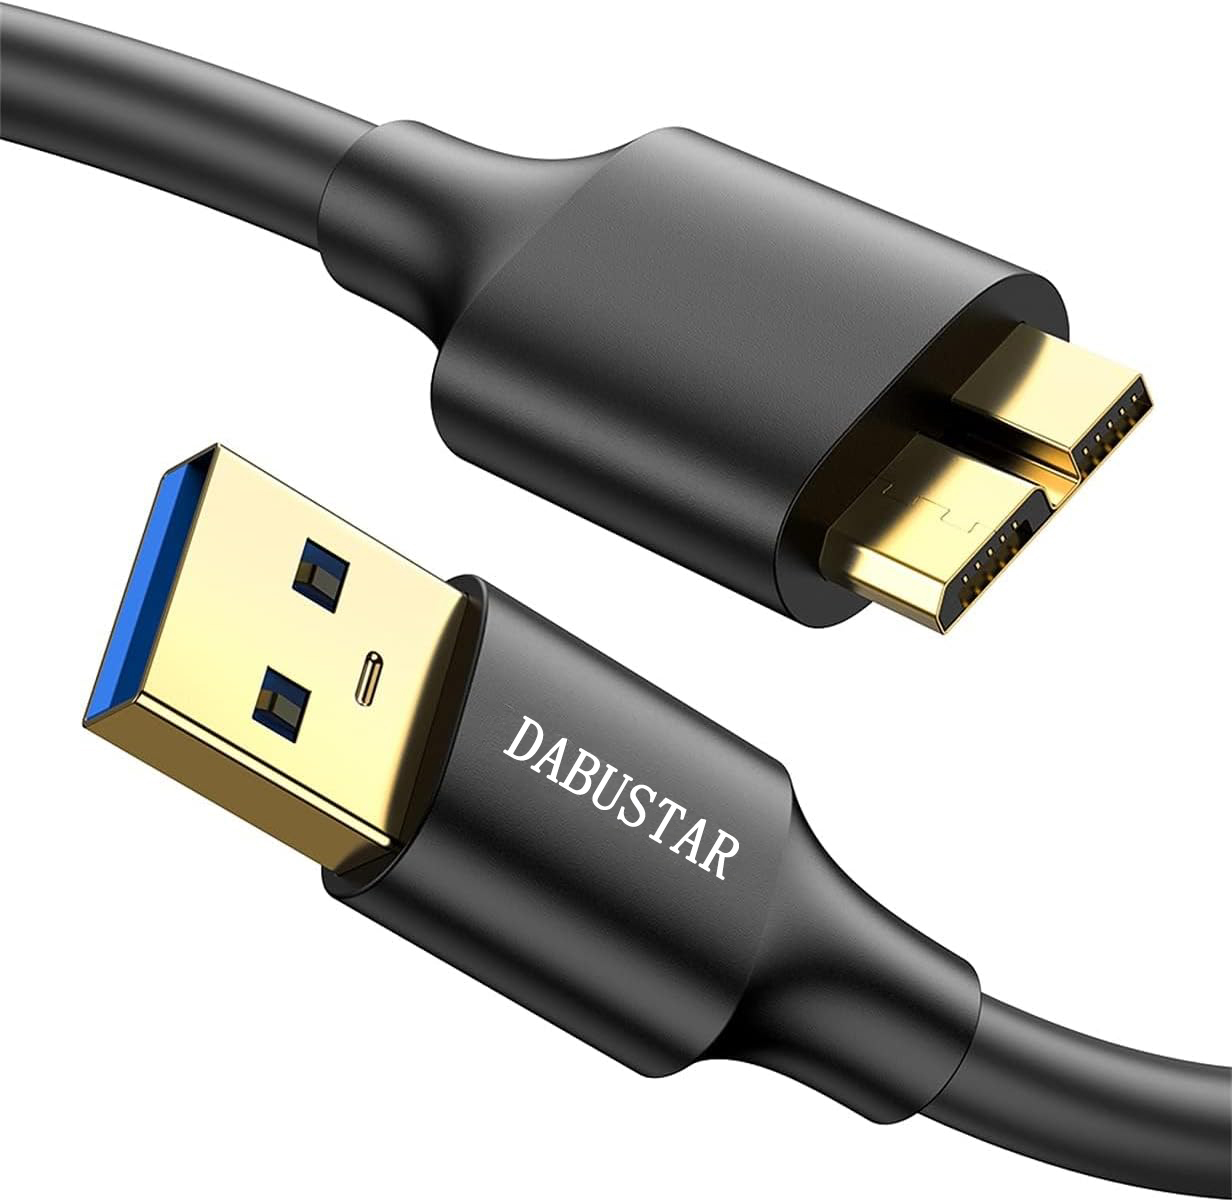 DABUSTAR Data cables Type A Male to Micro B Cord Compatible with Samsung Galaxy S5 Note 3 Camera Hard Drive and More 6ft